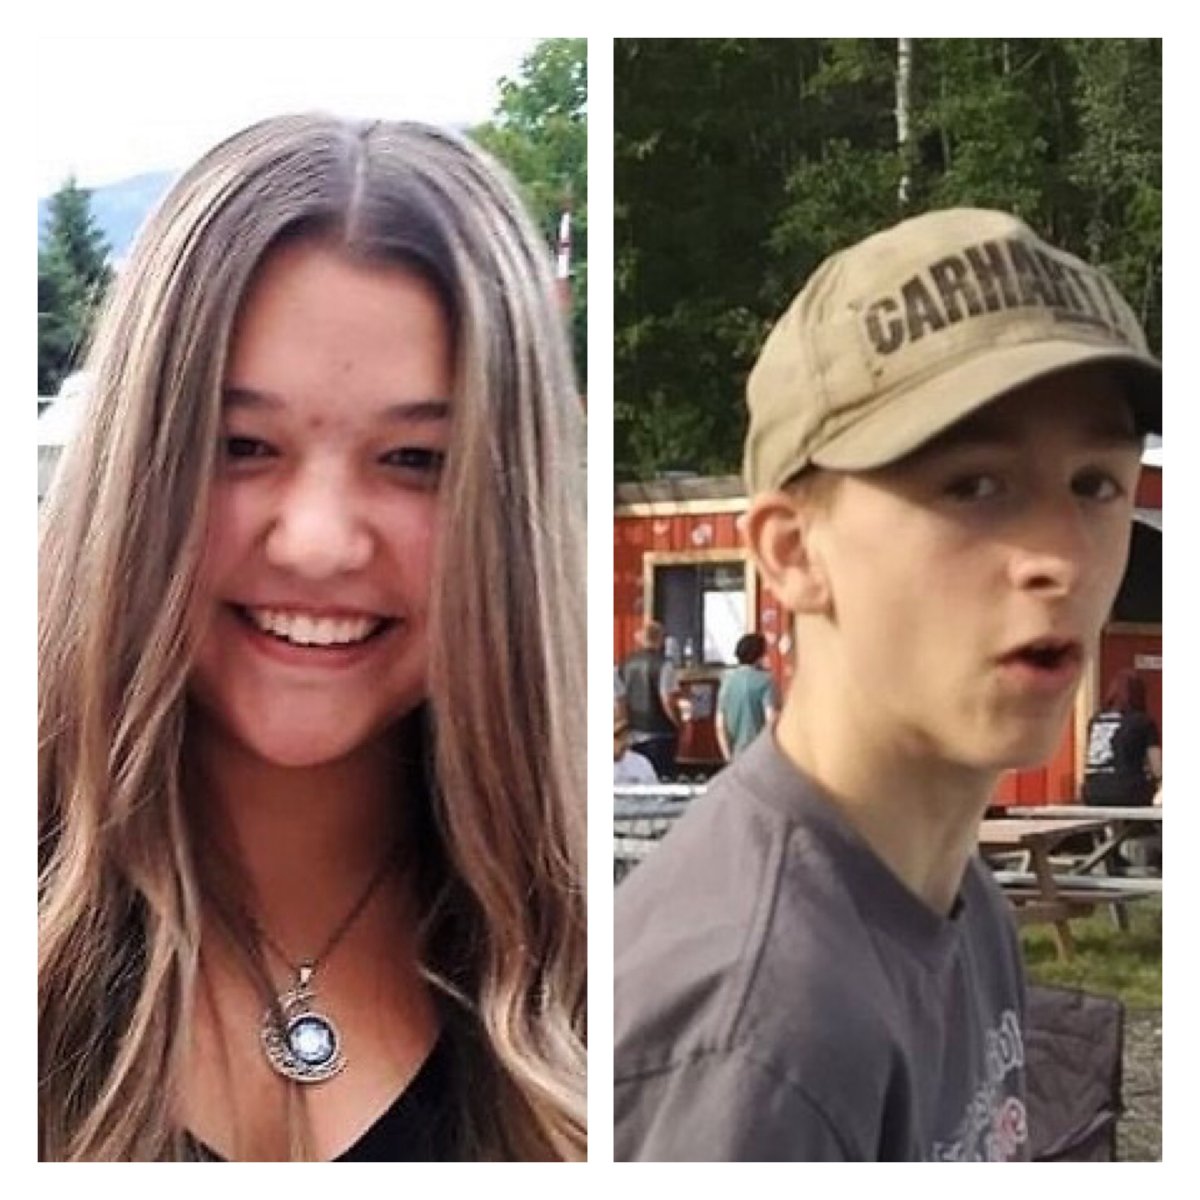 Trinity Erickson and Michael Campbell, both 14, have been found.